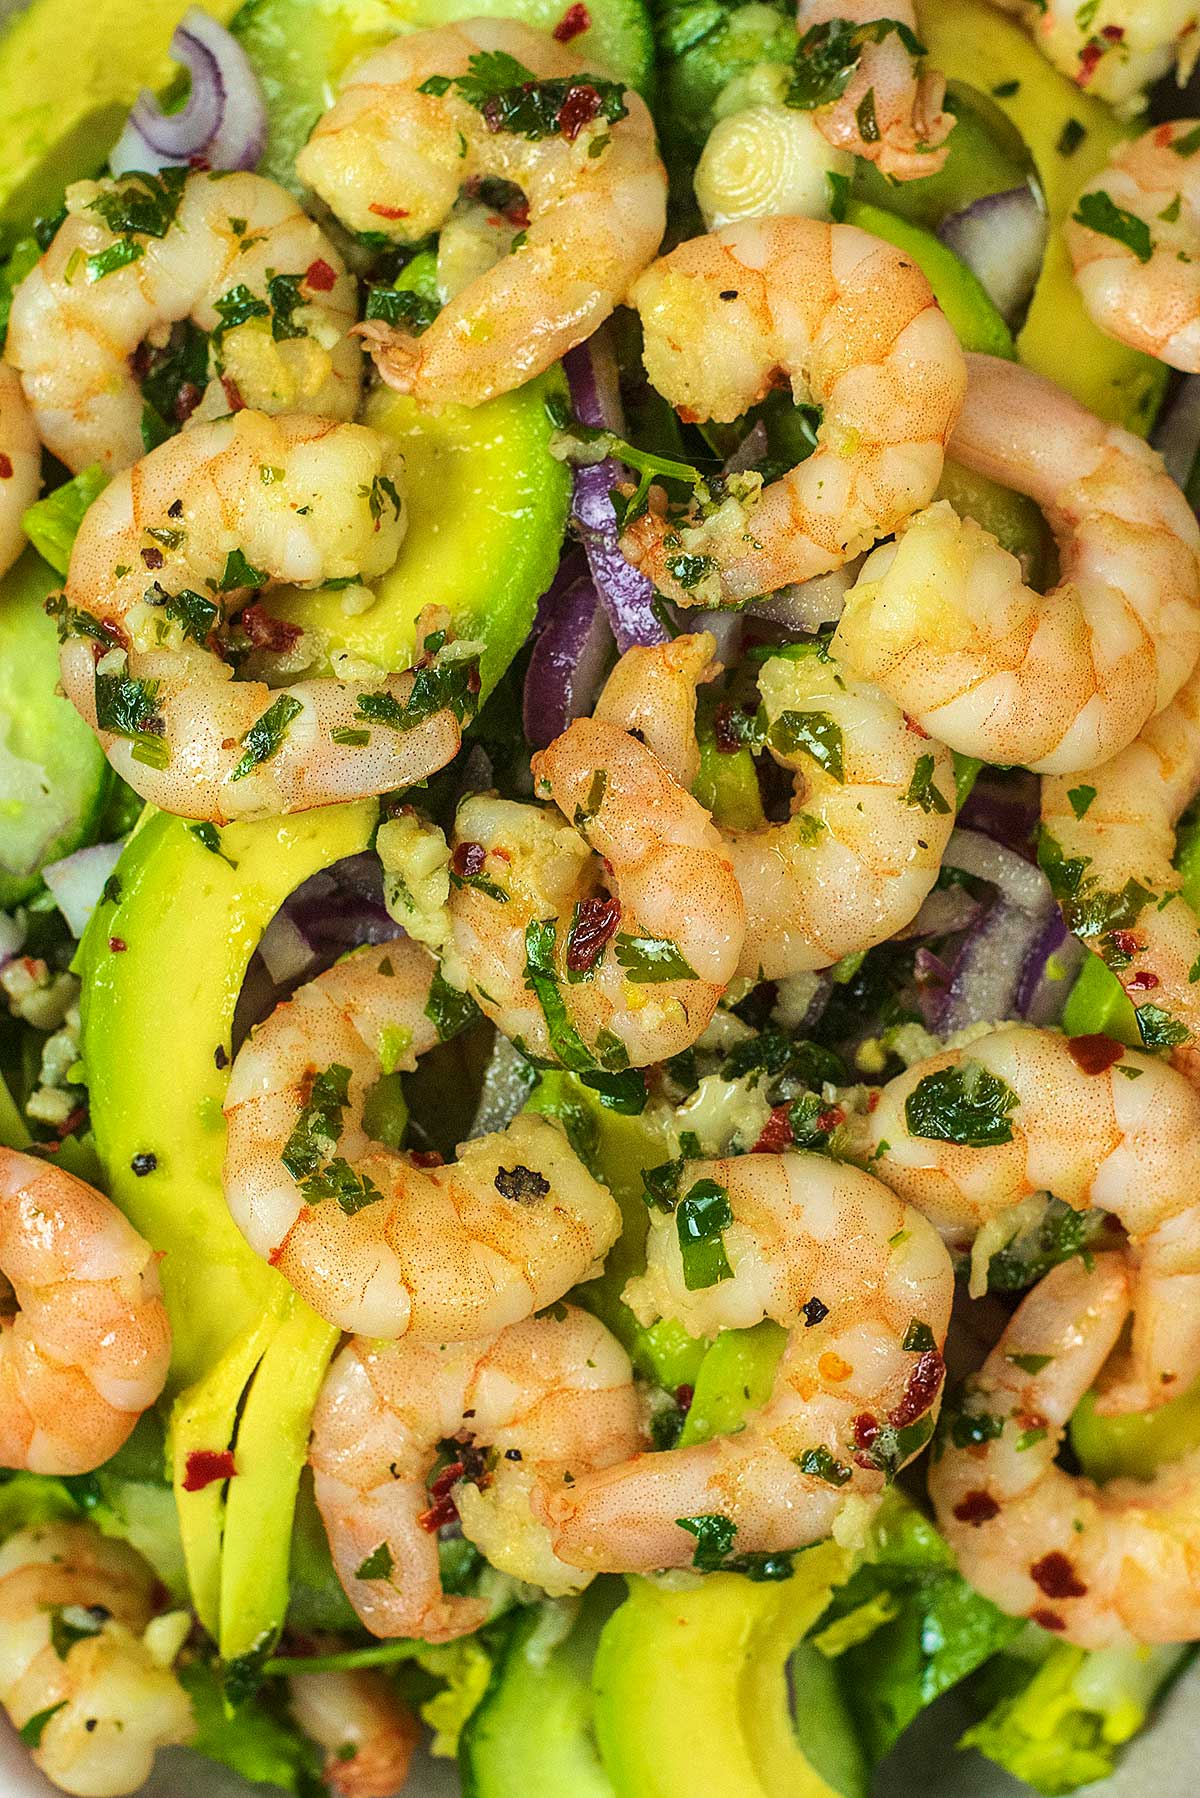 Marinated prawns on top of avocado and salad leaves.